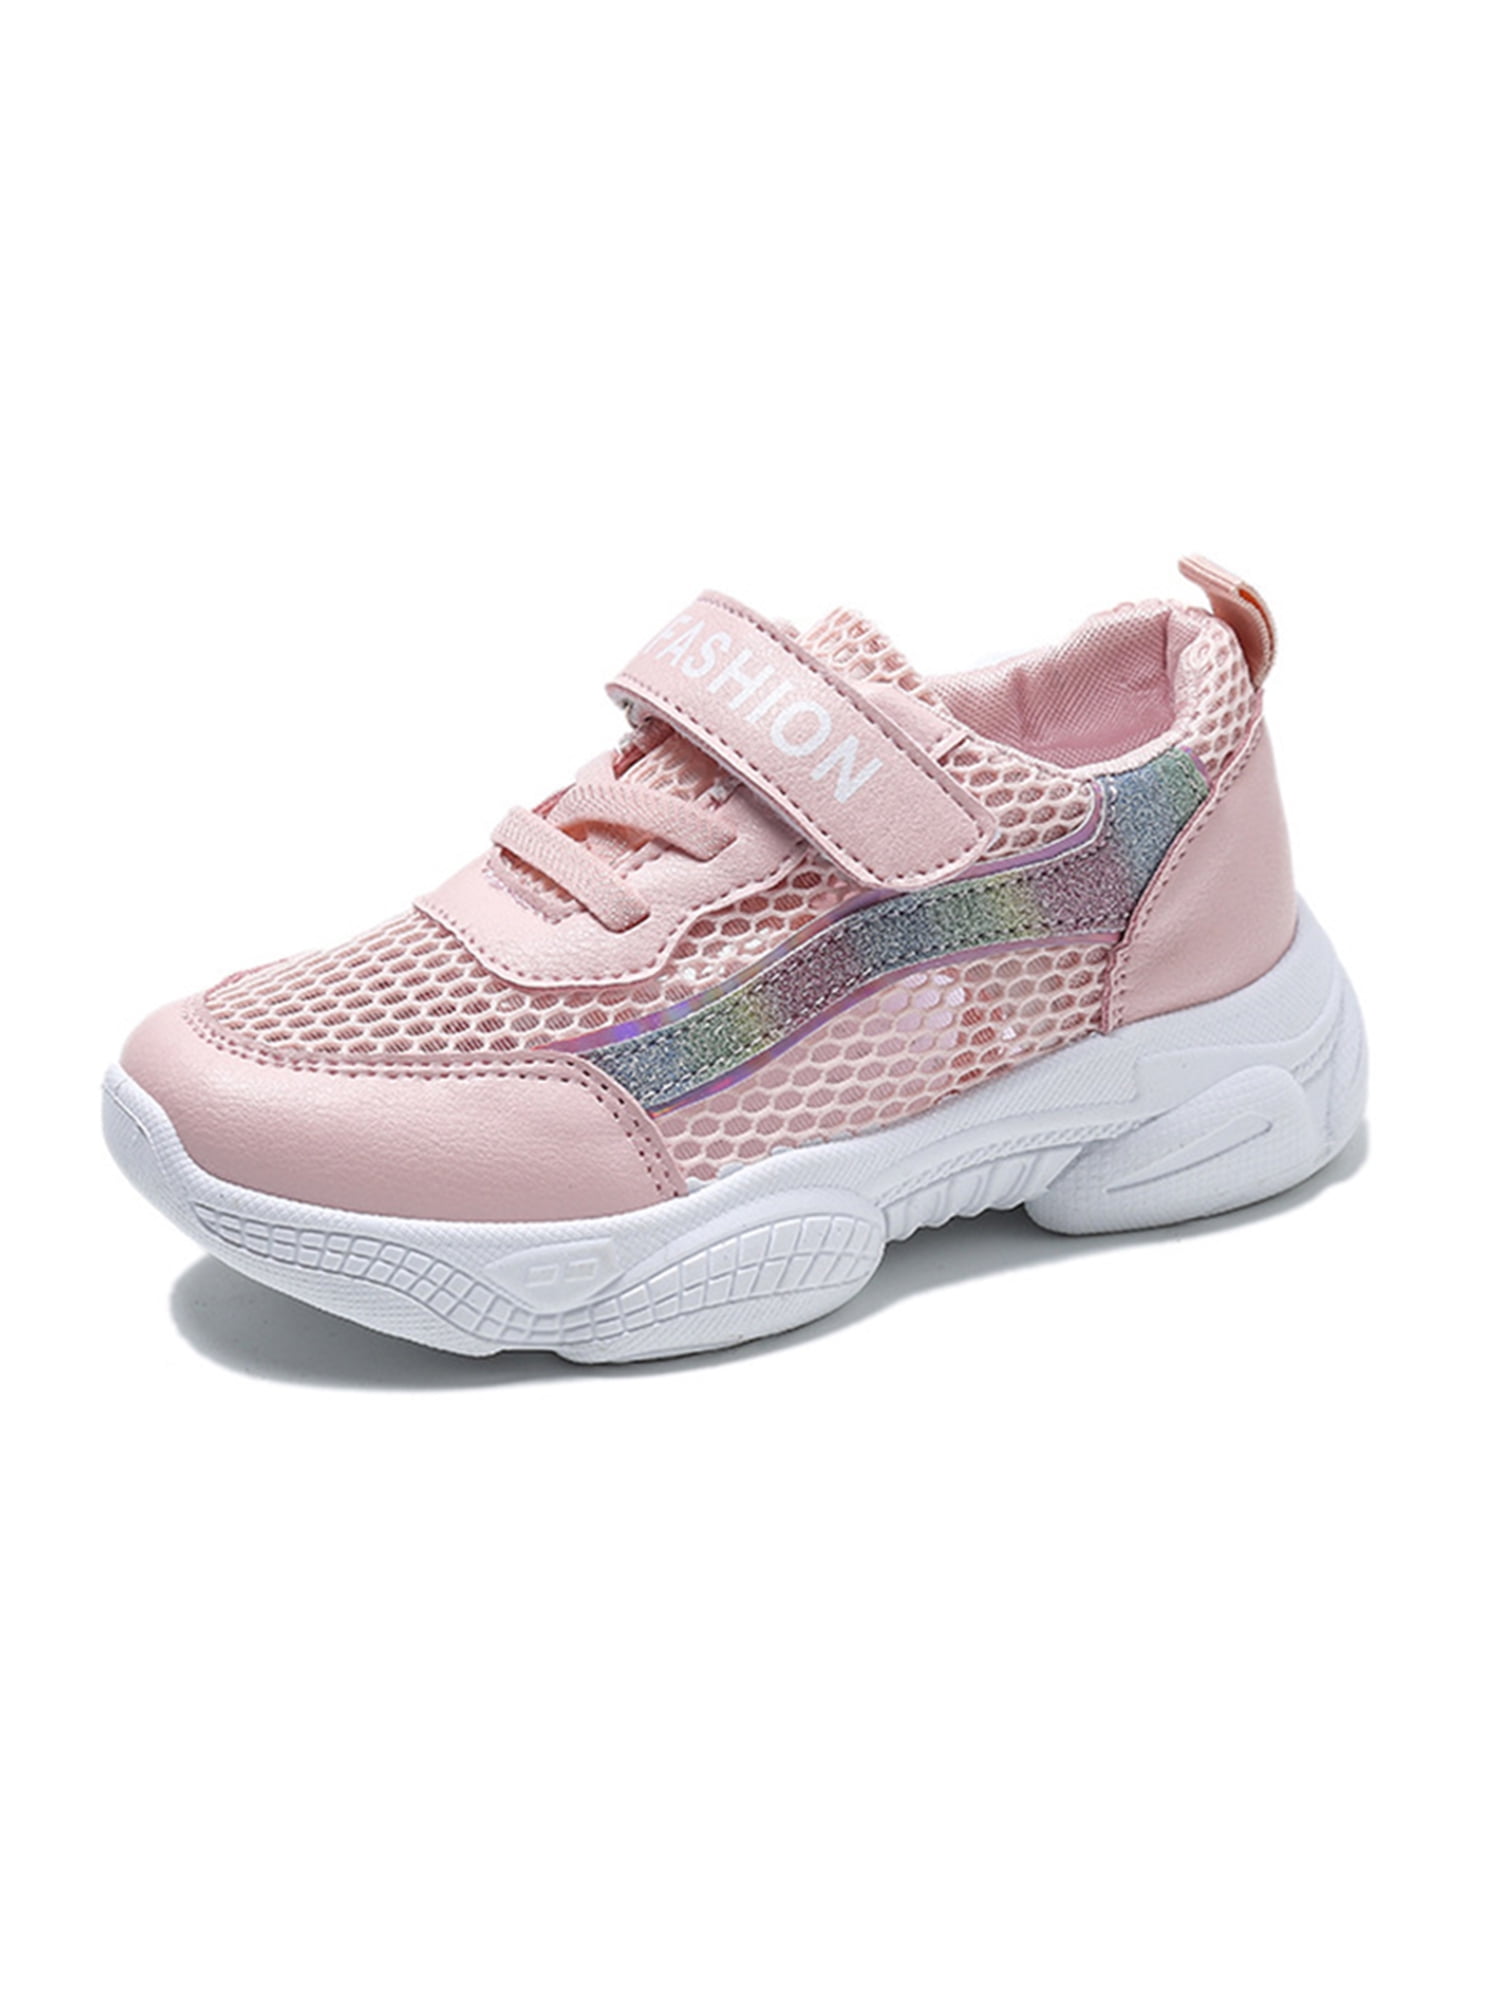 leeesa Kids LED Light Up Shoes,Boys Luminous Trainers Sneakers Shoes，Lightweight  Waterproof Non-Slip Kids Elastic Shock Absorption Mesh Sports Shoes  Suitable for school running shoes : Amazon.co.uk: Fashion